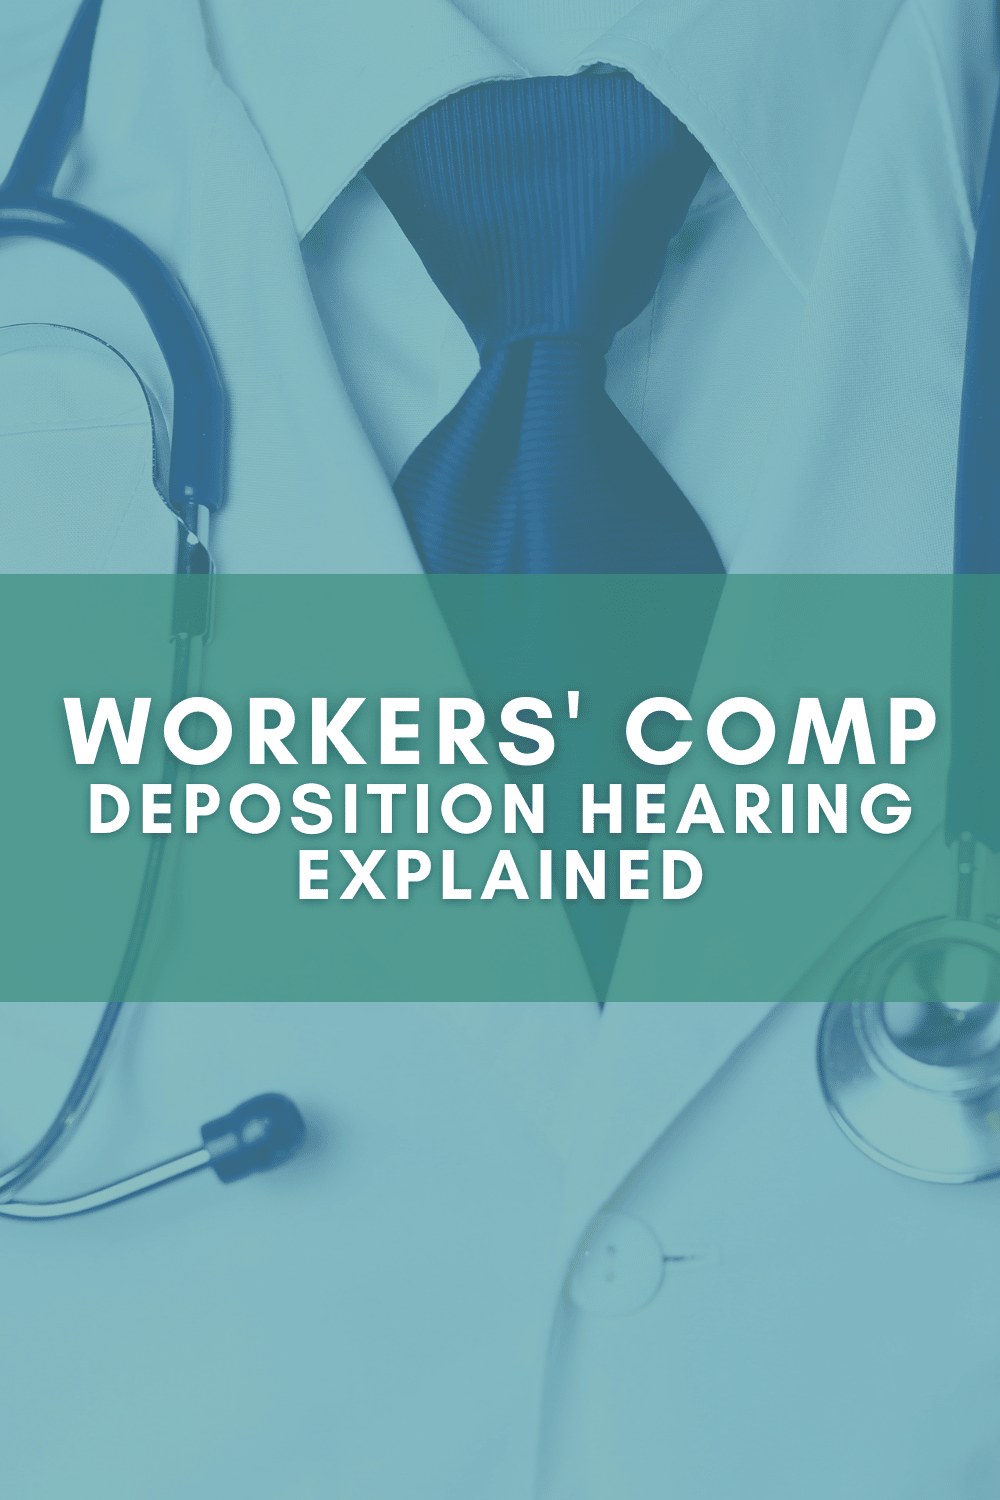 What Is A Deposition Hearing For Workers Comp?